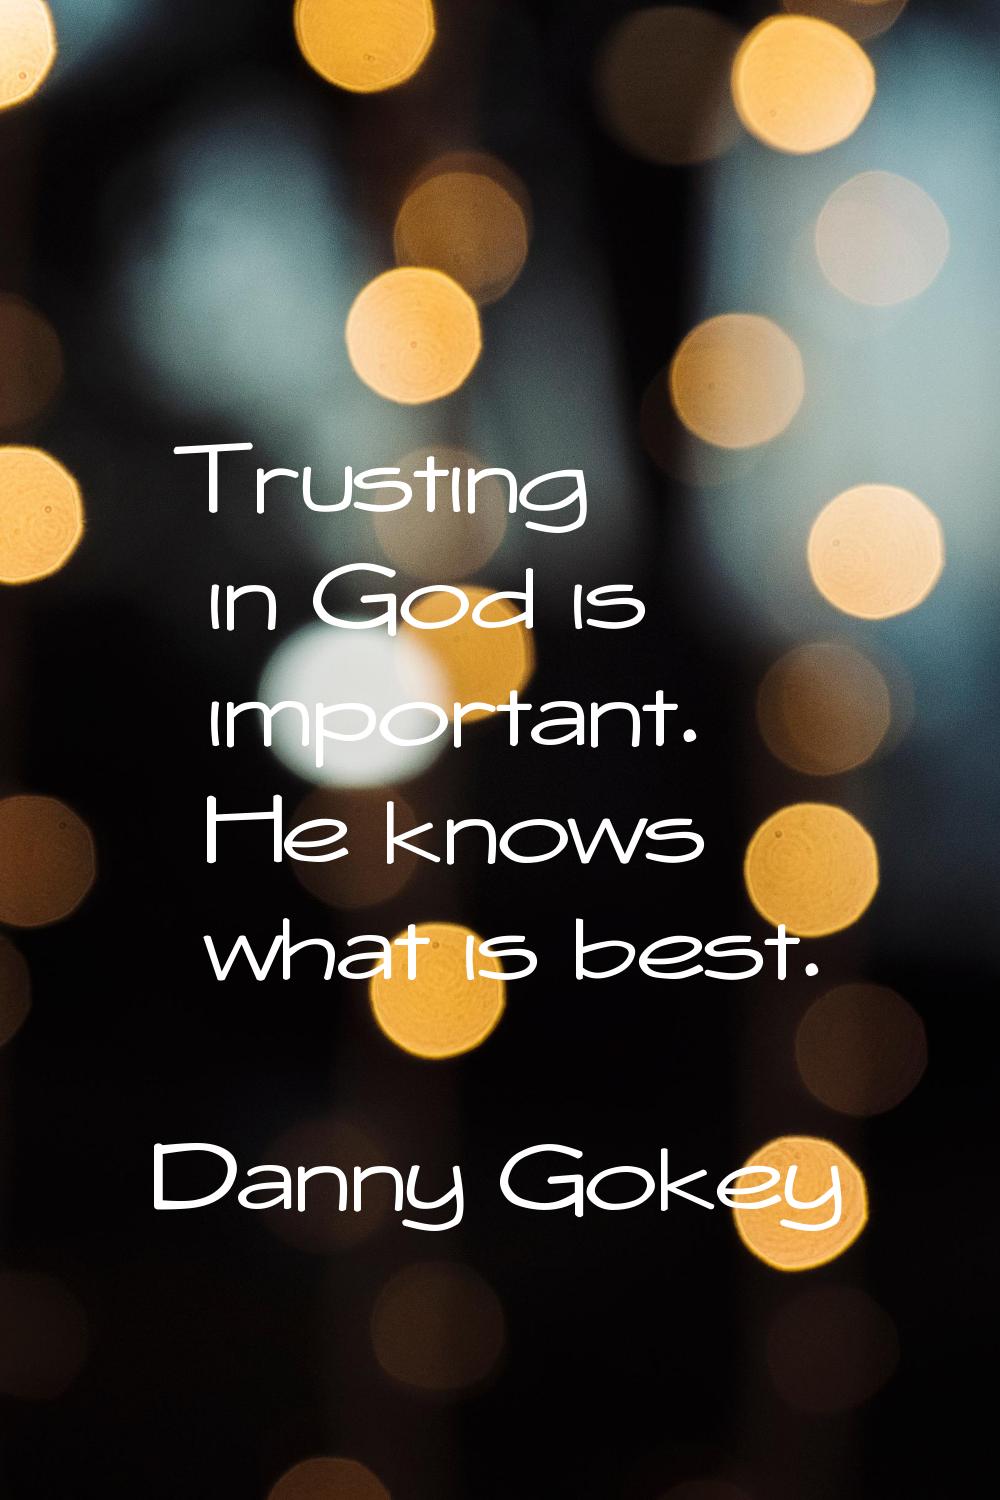 Trusting in God is important. He knows what is best.